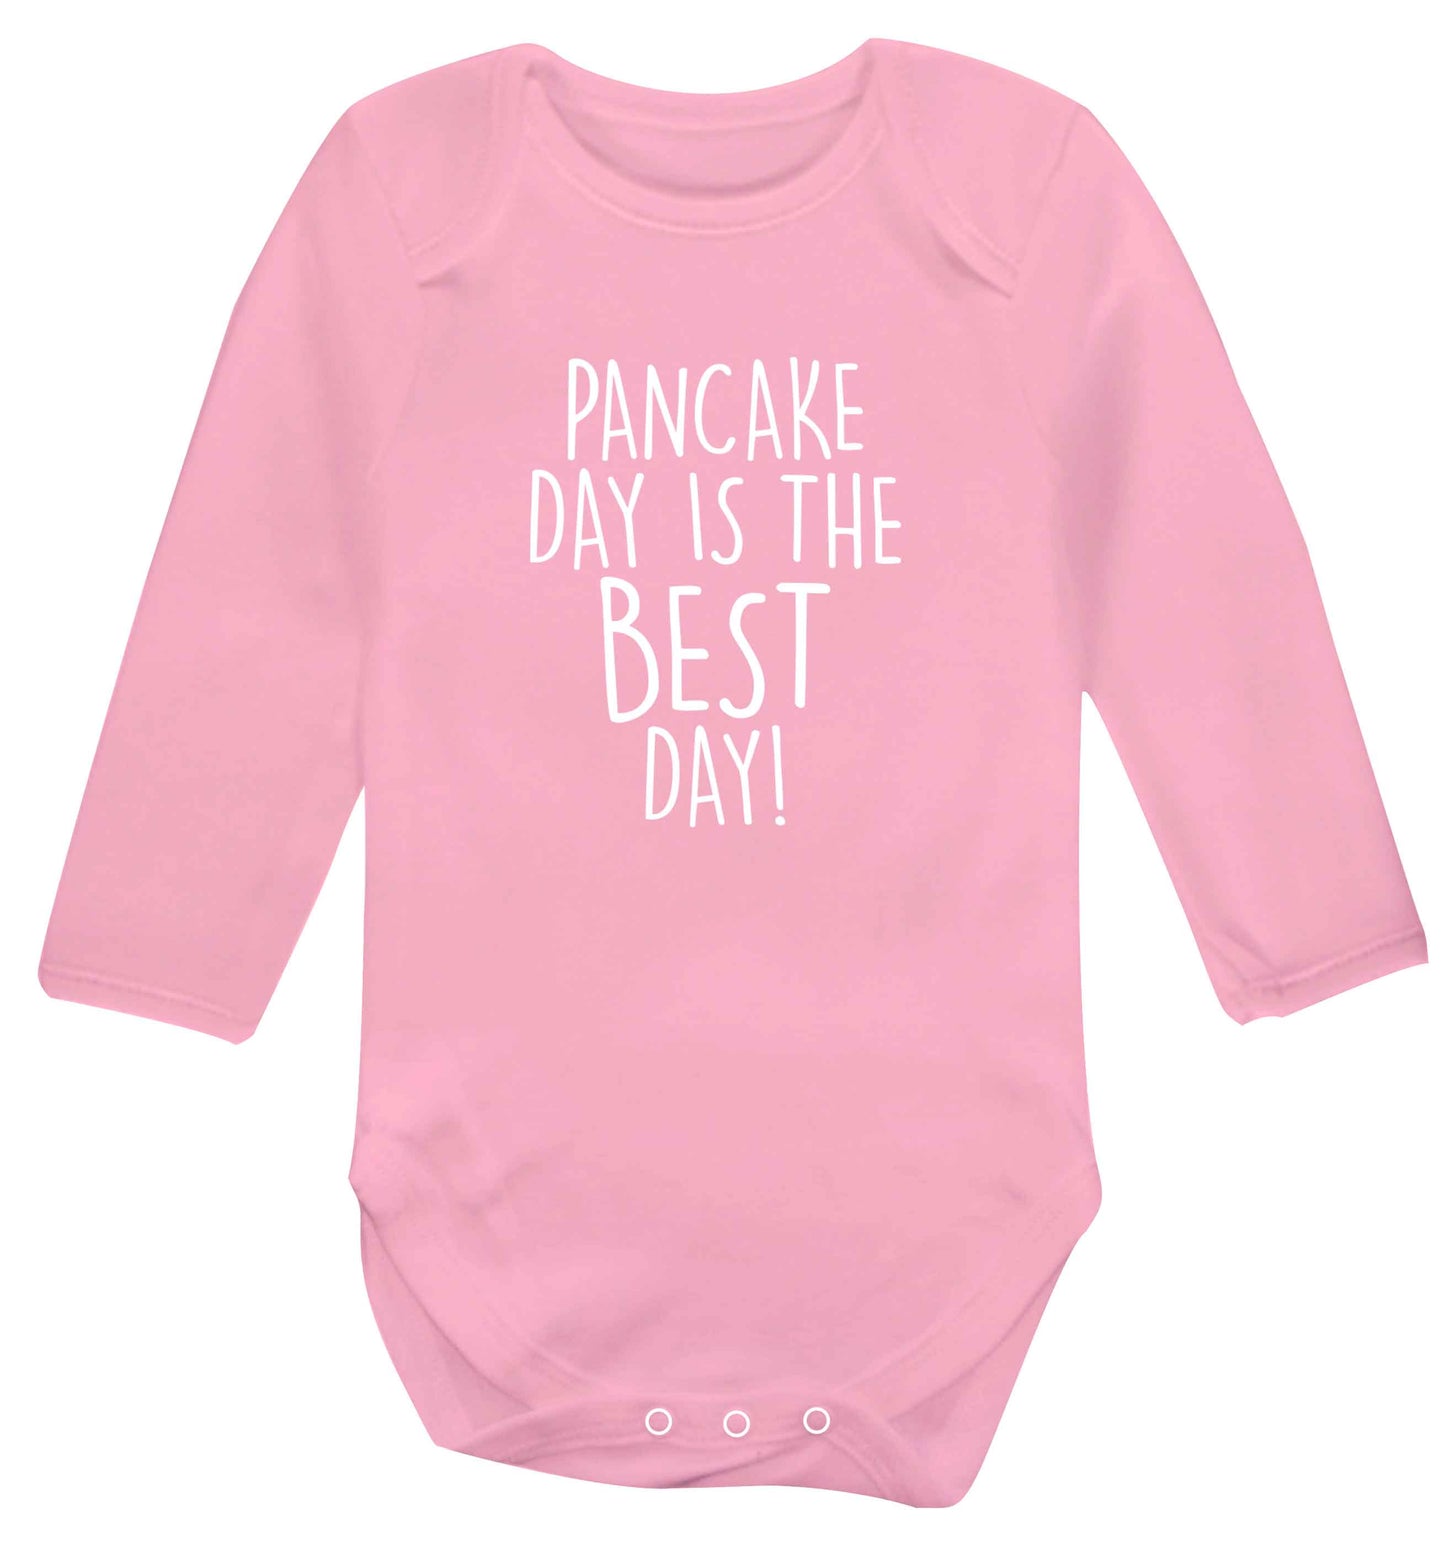 Pancake day is the best day baby vest long sleeved pale pink 6-12 months